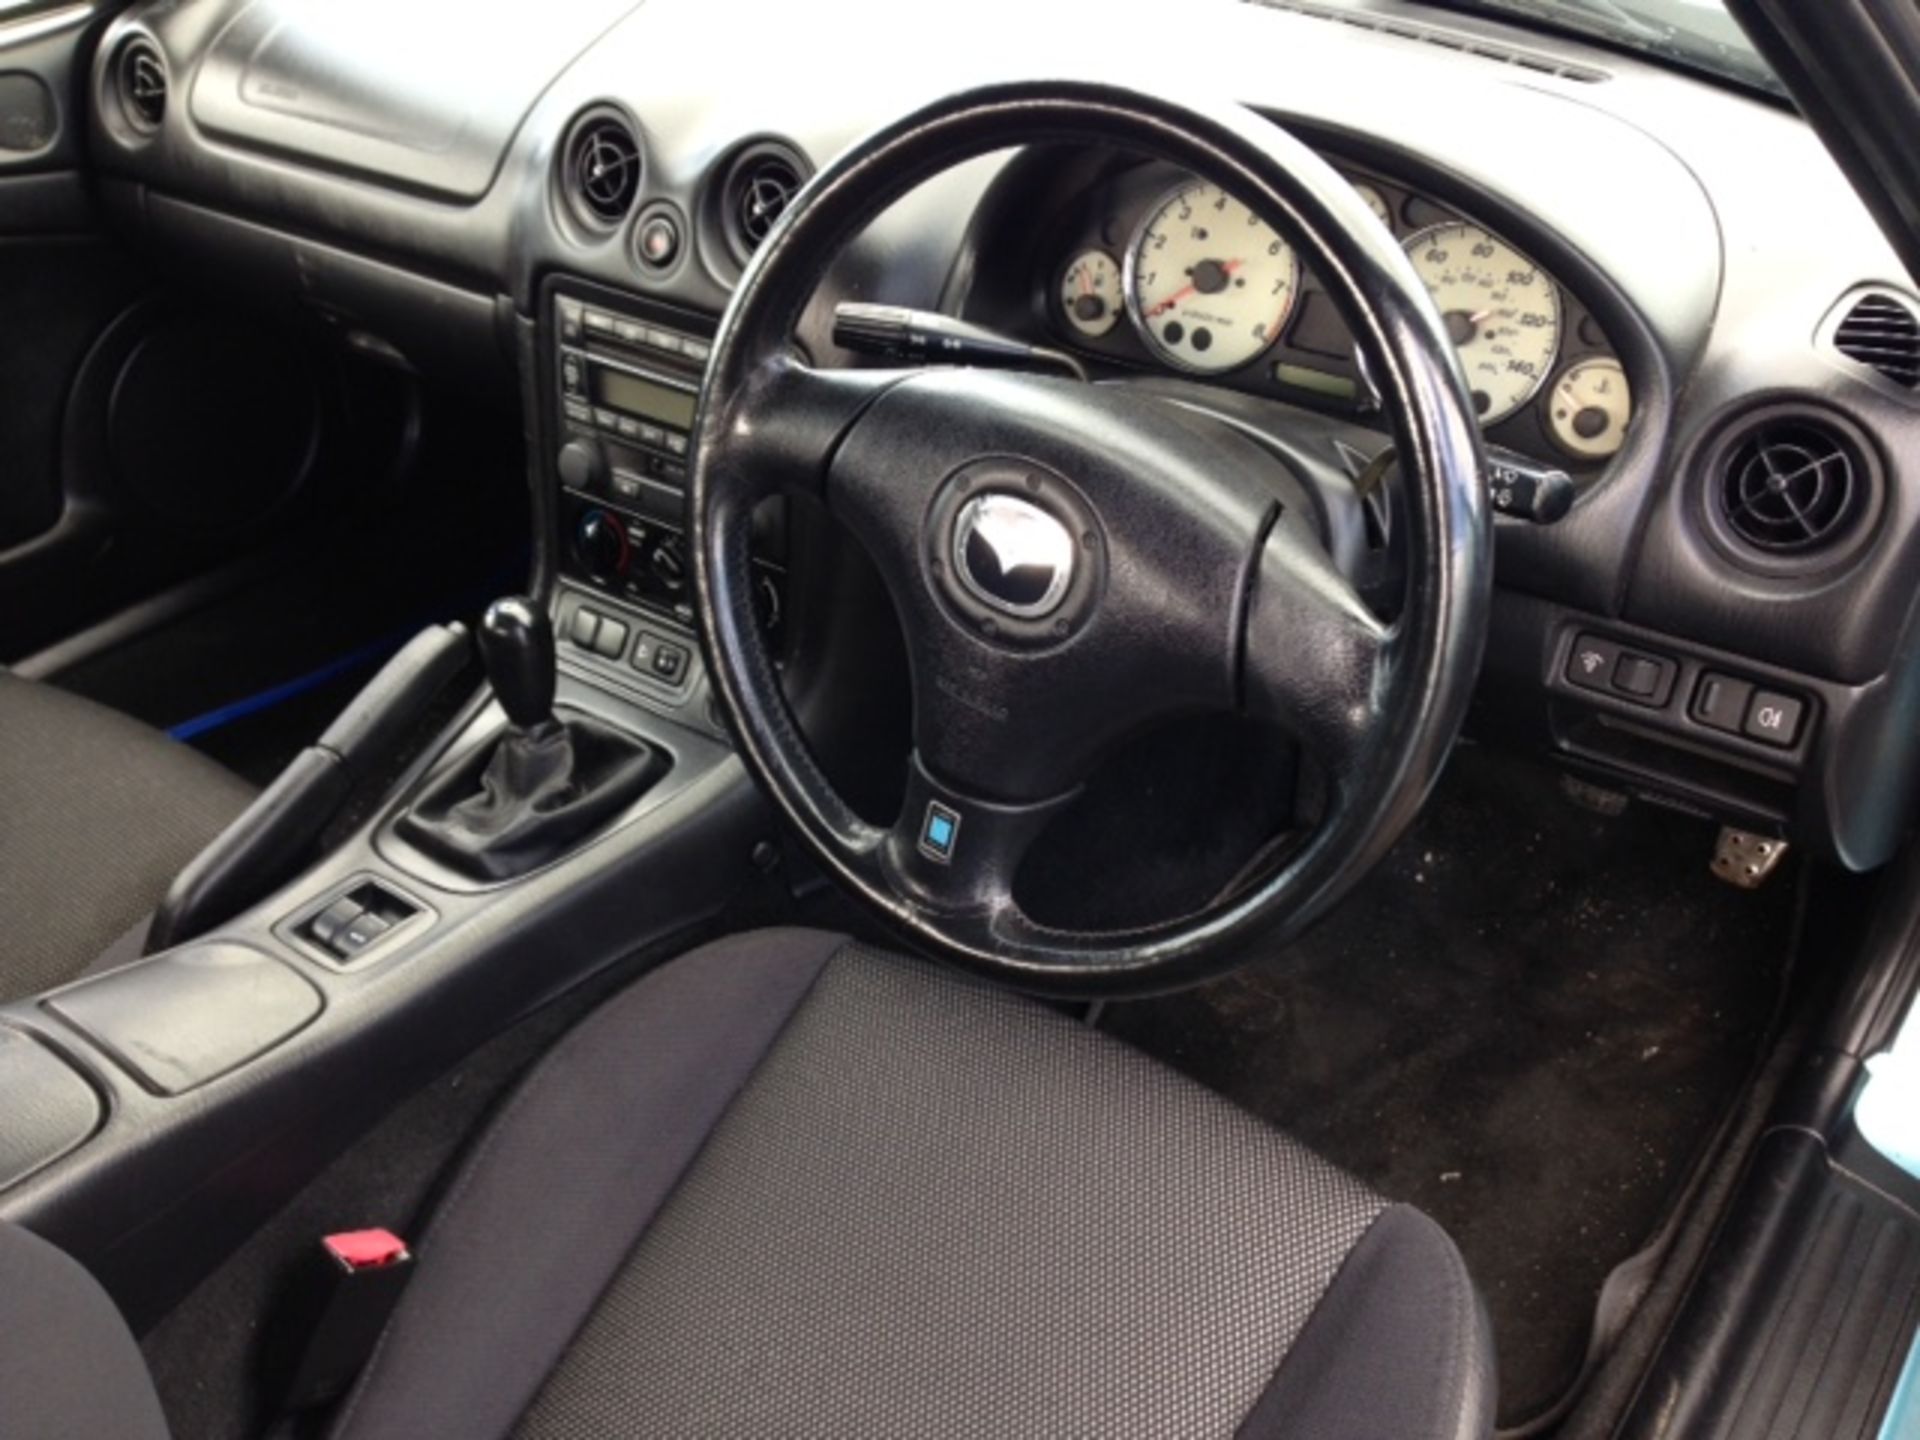 MAZDA, MX-5 1.8I - 1840cc, Chassis number JMZNB18P200223449 - presented in Crystal Blue Metallic, - Image 5 of 11